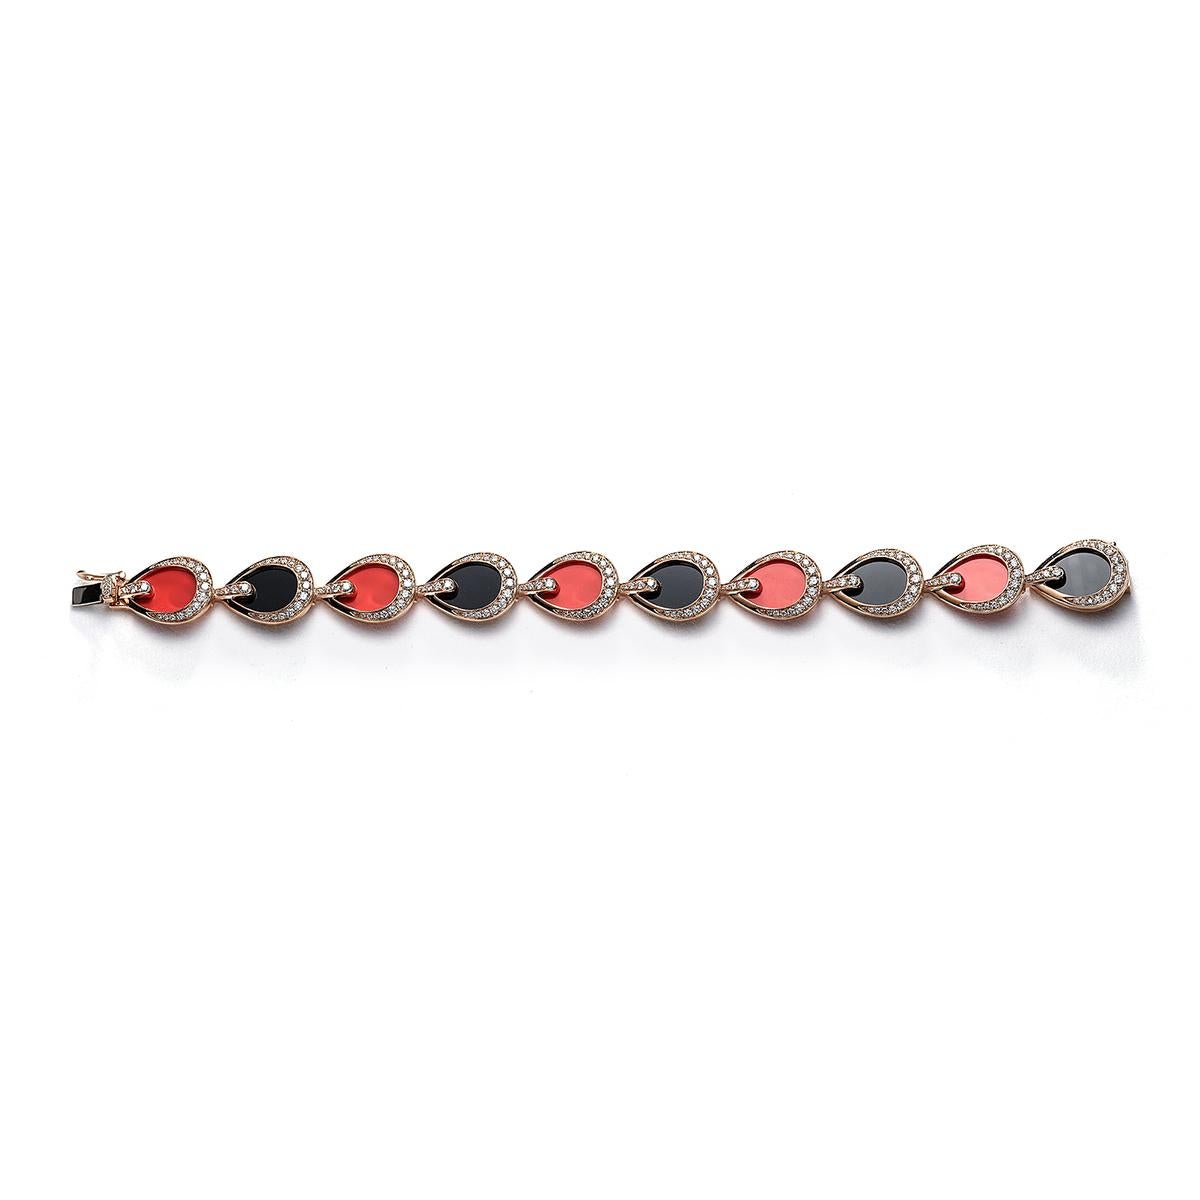 Bracelet in 18kt pink gold set with 192 diamonds 2.38 cts, 5 onyx 8.81 cts and 5 coral 6.15 cts    